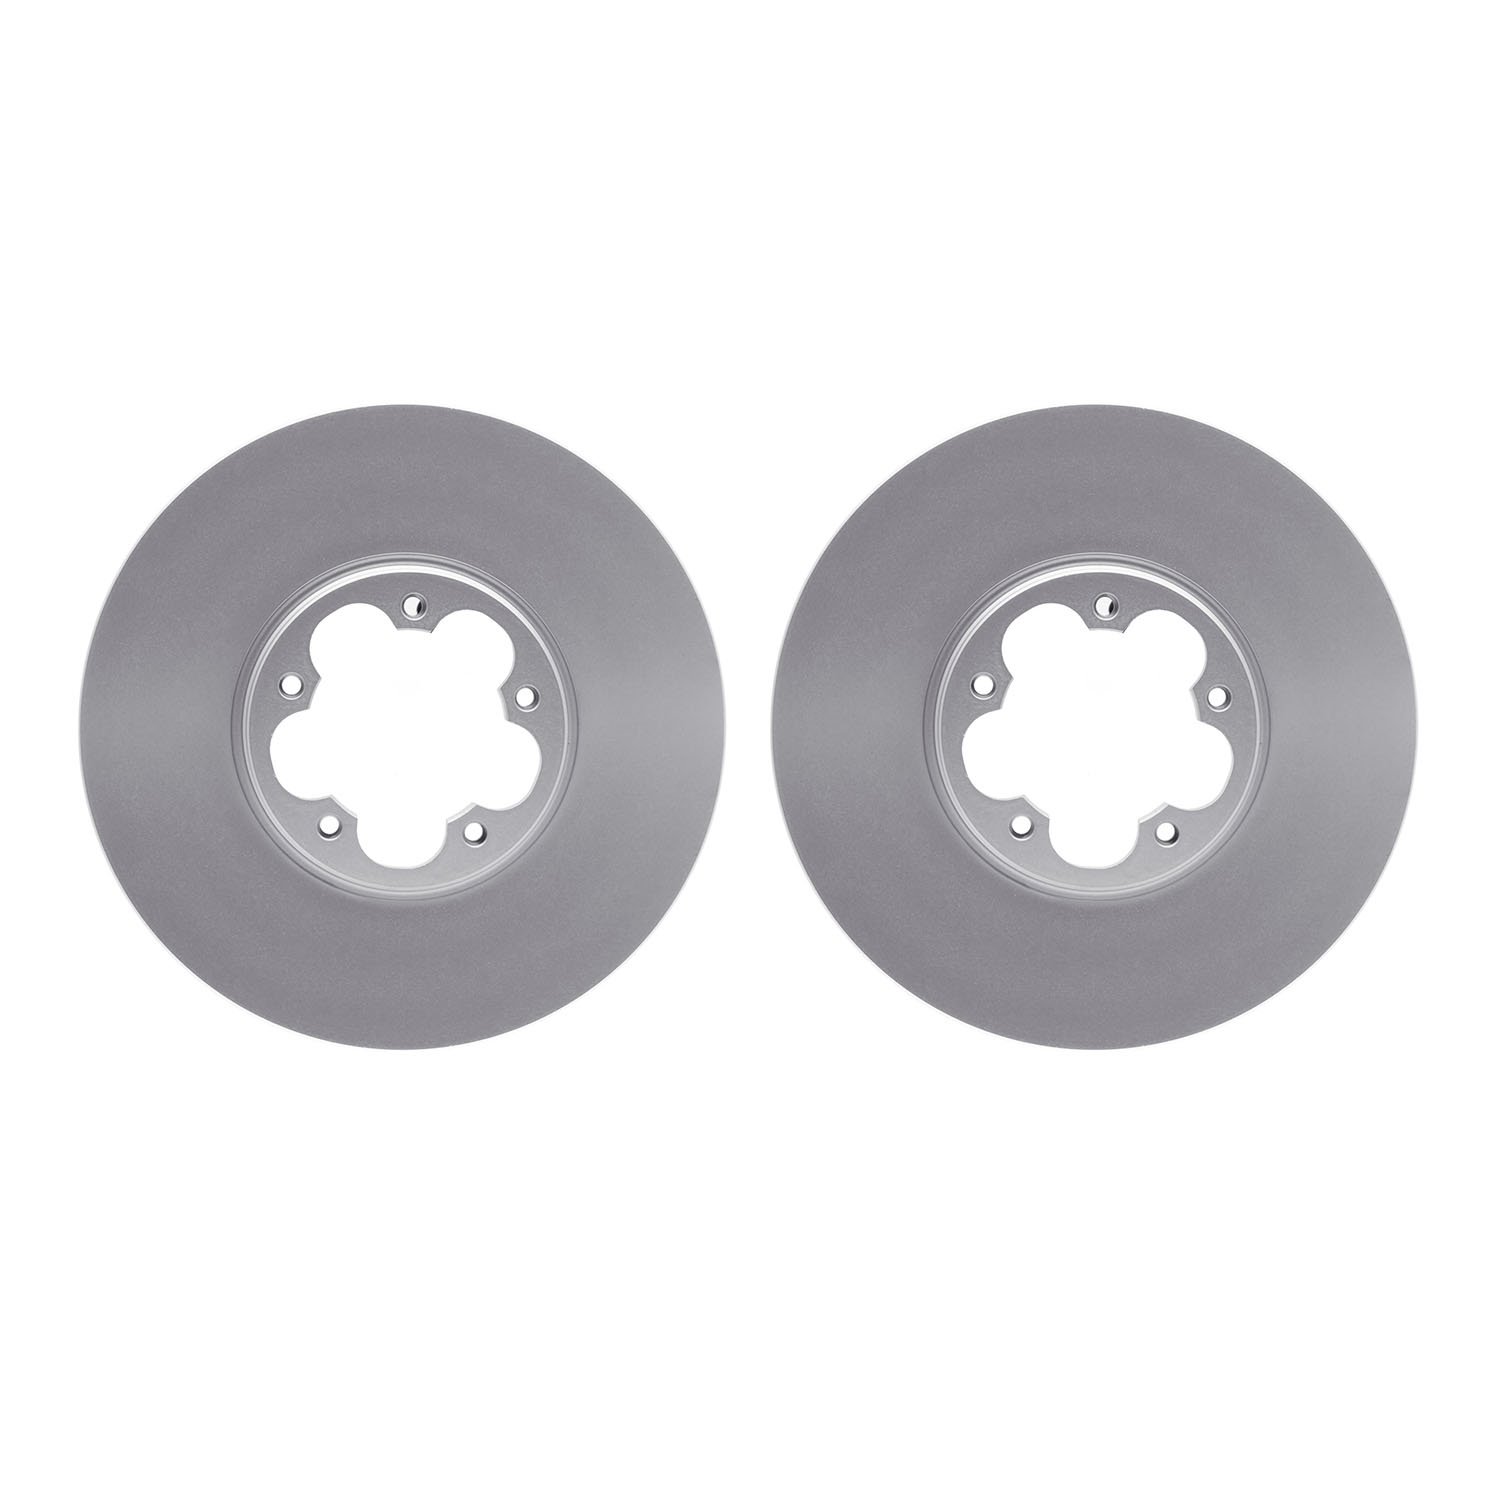 4002-54164 Geospec Brake Rotors, Fits Select Ford/Lincoln/Mercury/Mazda, Position: Front